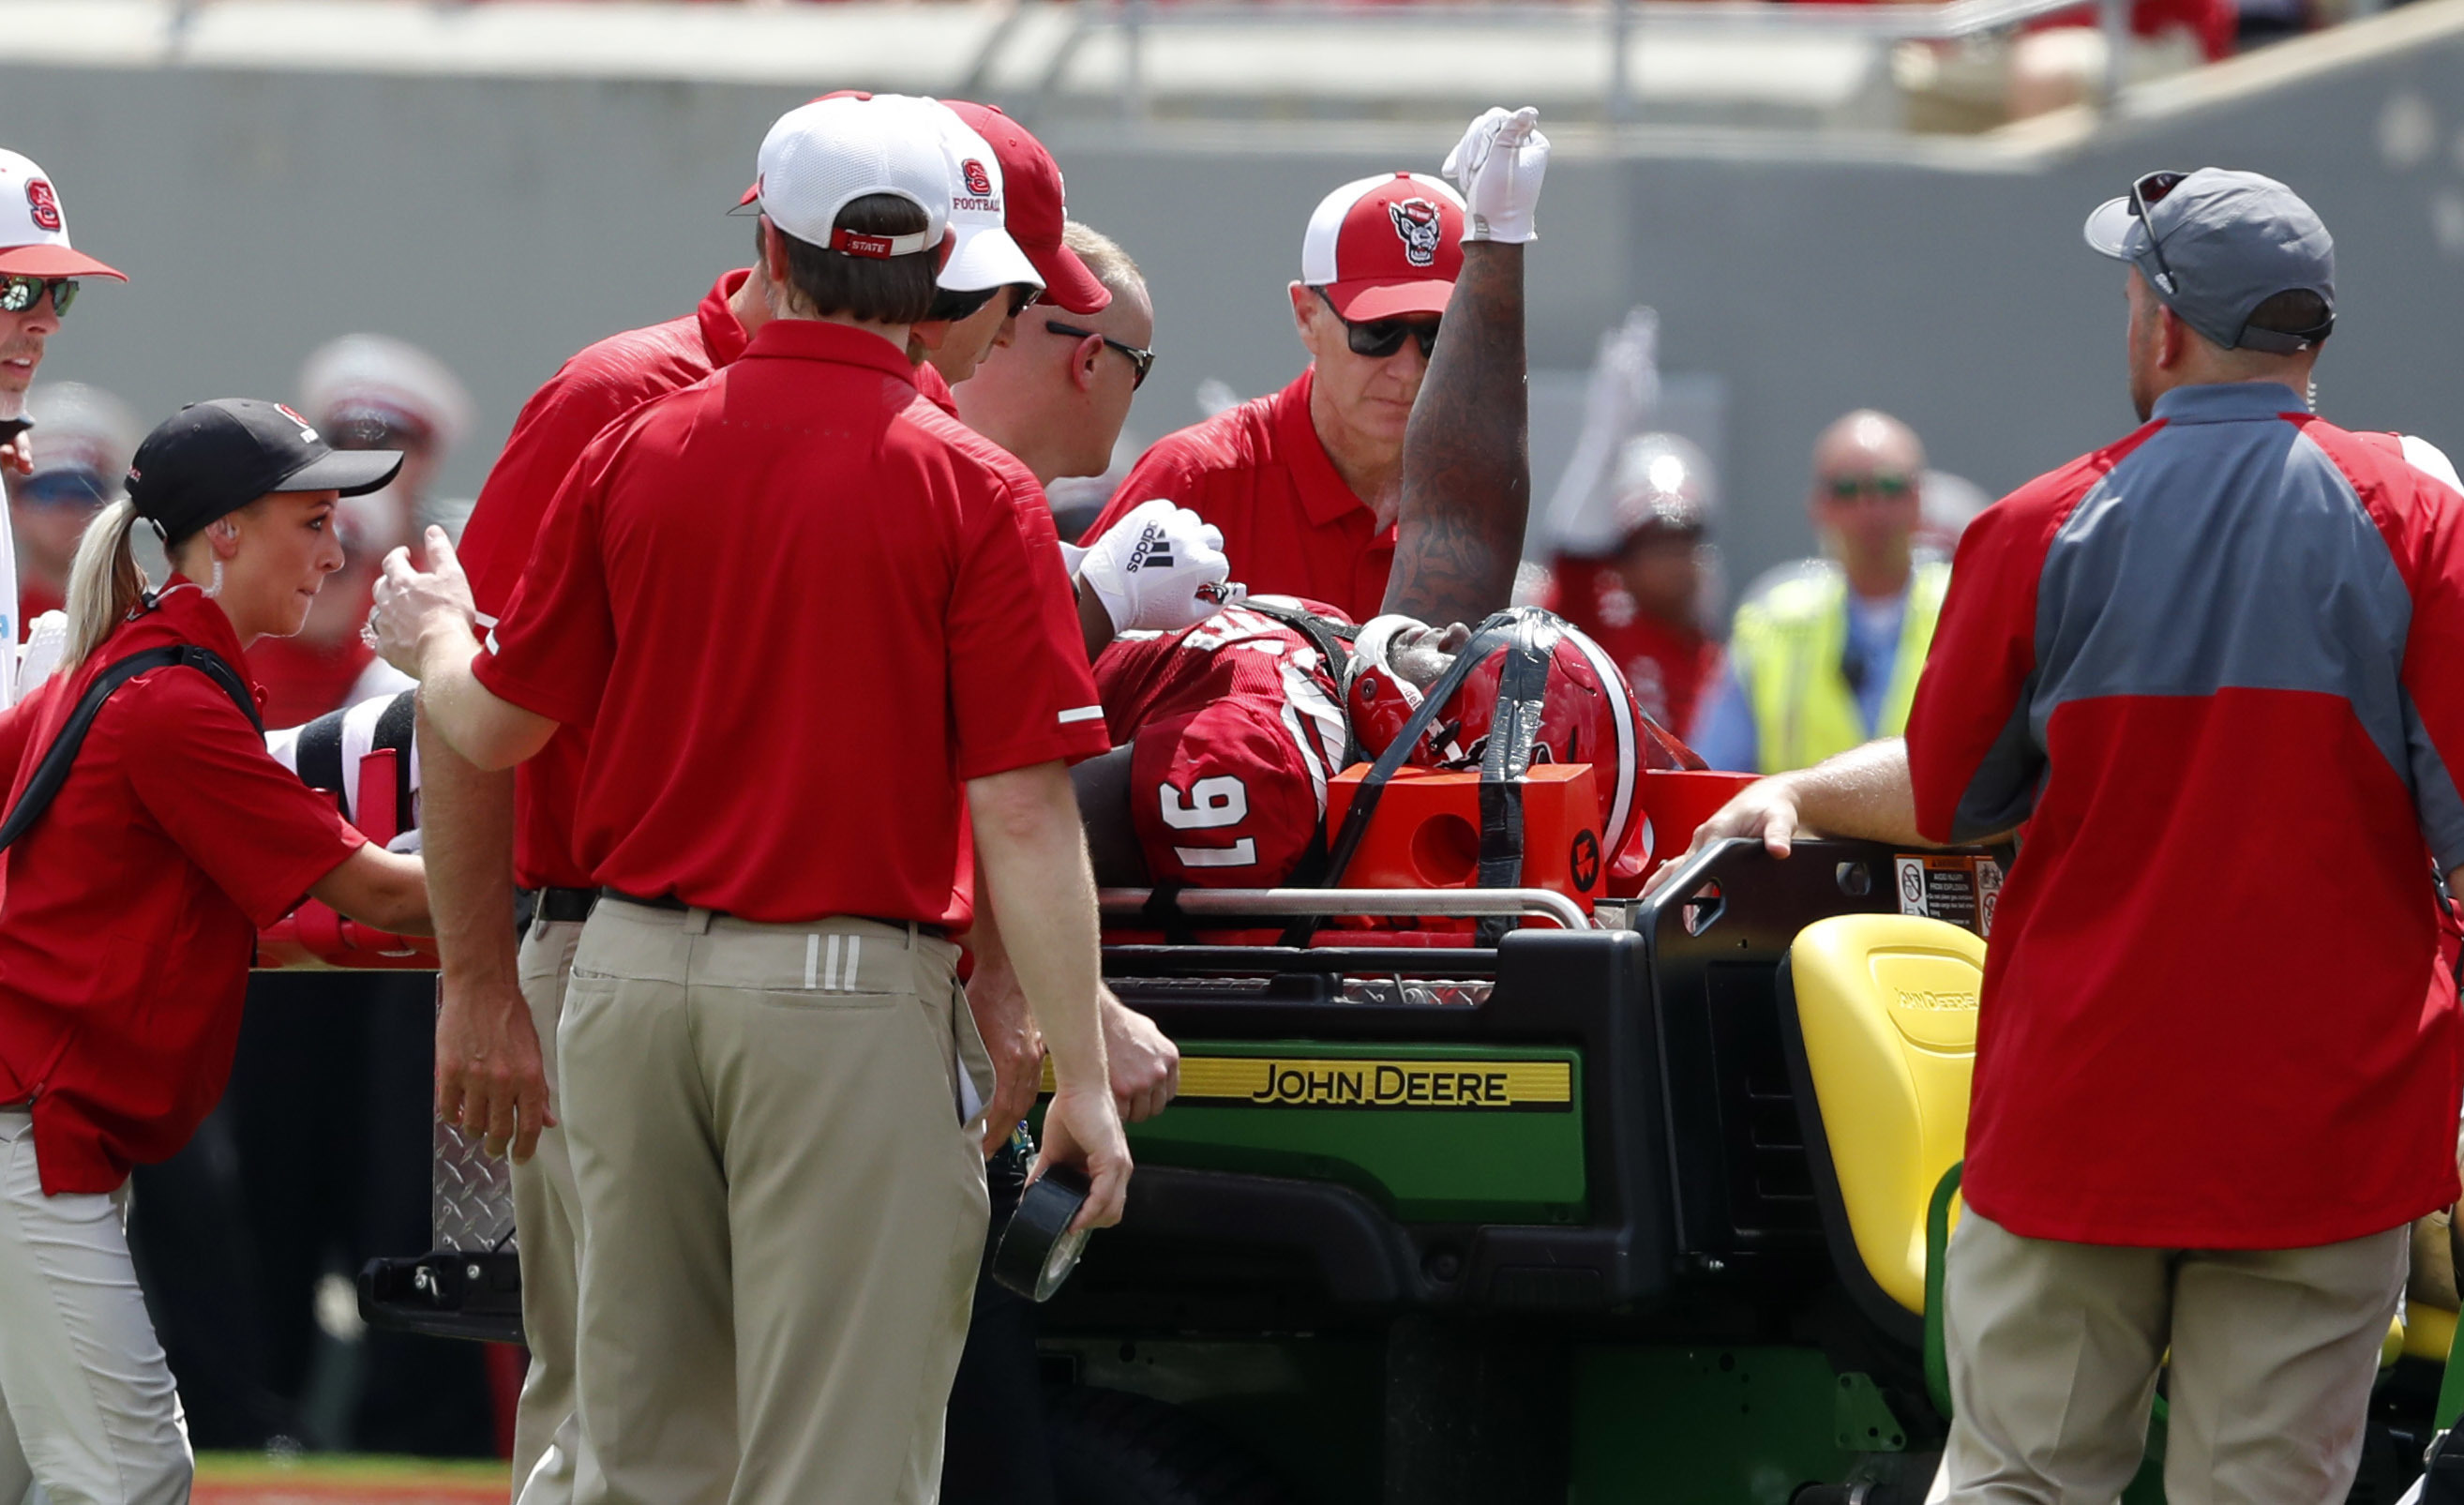 NC State’s Bryant carted off after injury